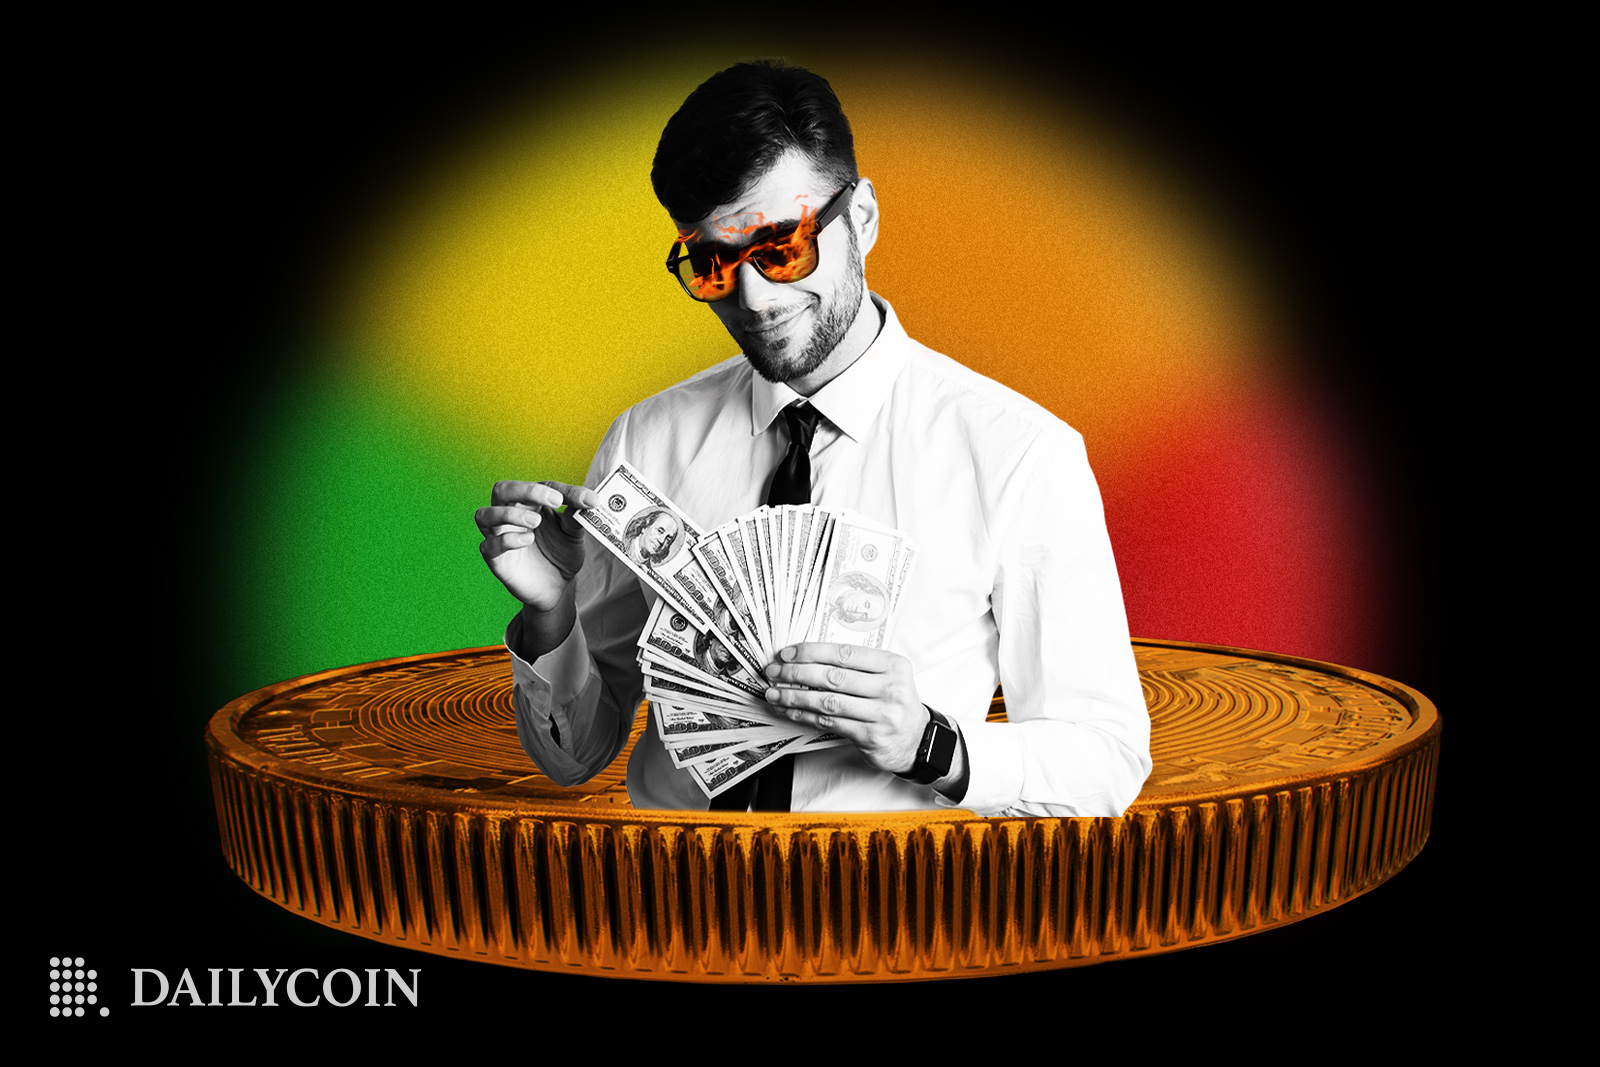 A man is holding dollar bills in his hand standing inside of a crypto coin.